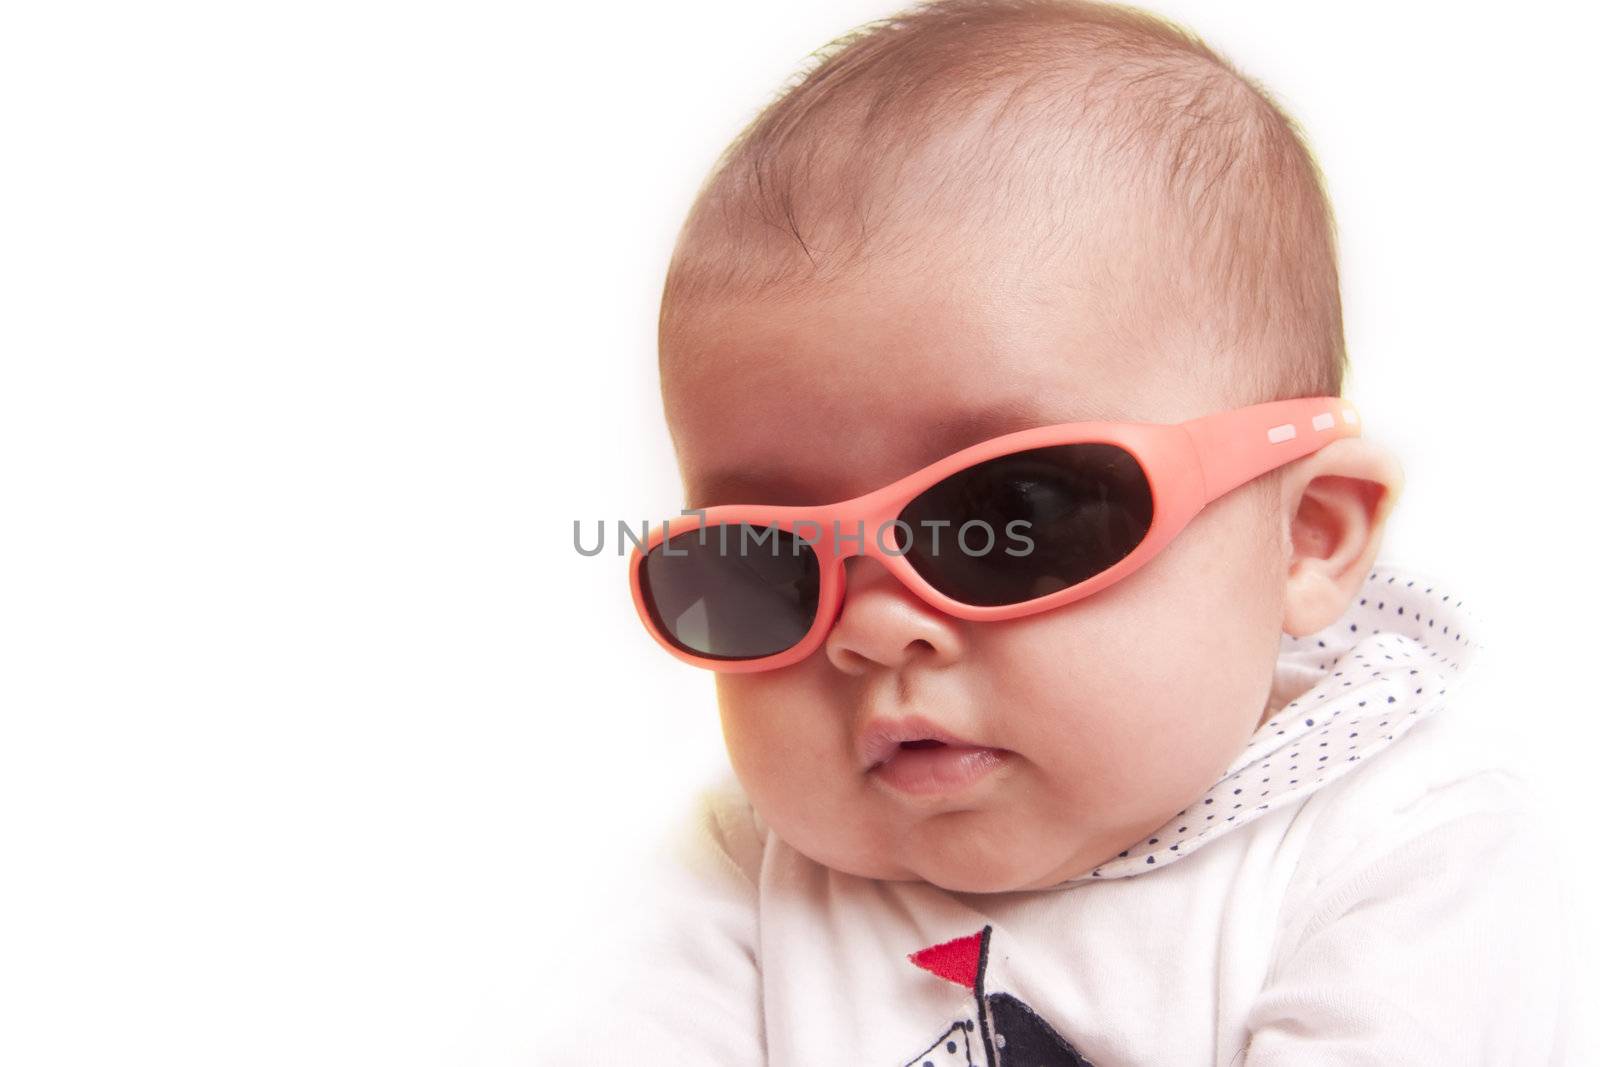 baby with sunglasses by jfcalheiros